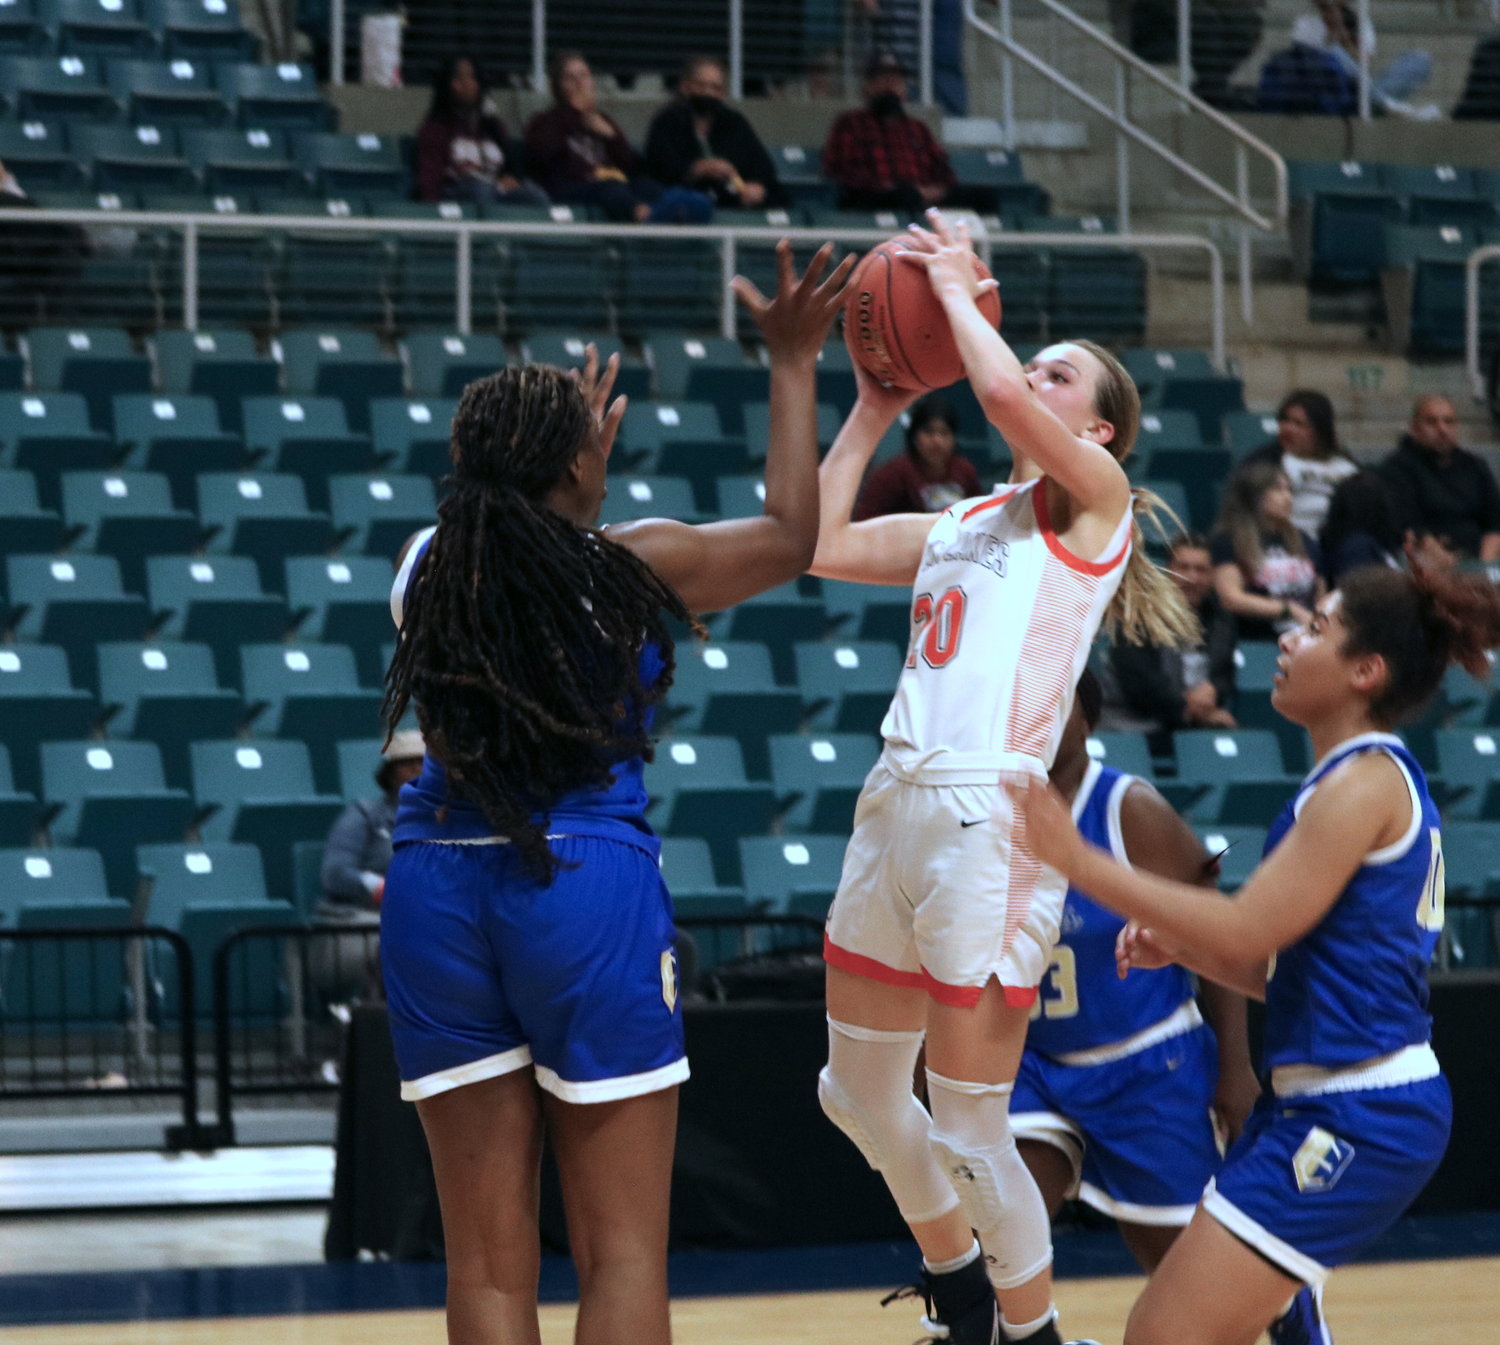 Seven Lakes Summer Halphen shoots over a defender Seven Lakes’ Justice Carlton drives to the basket during Tuesday’s Class 6A bi-district game against Fort Bend Elkins at the Merrell Center.